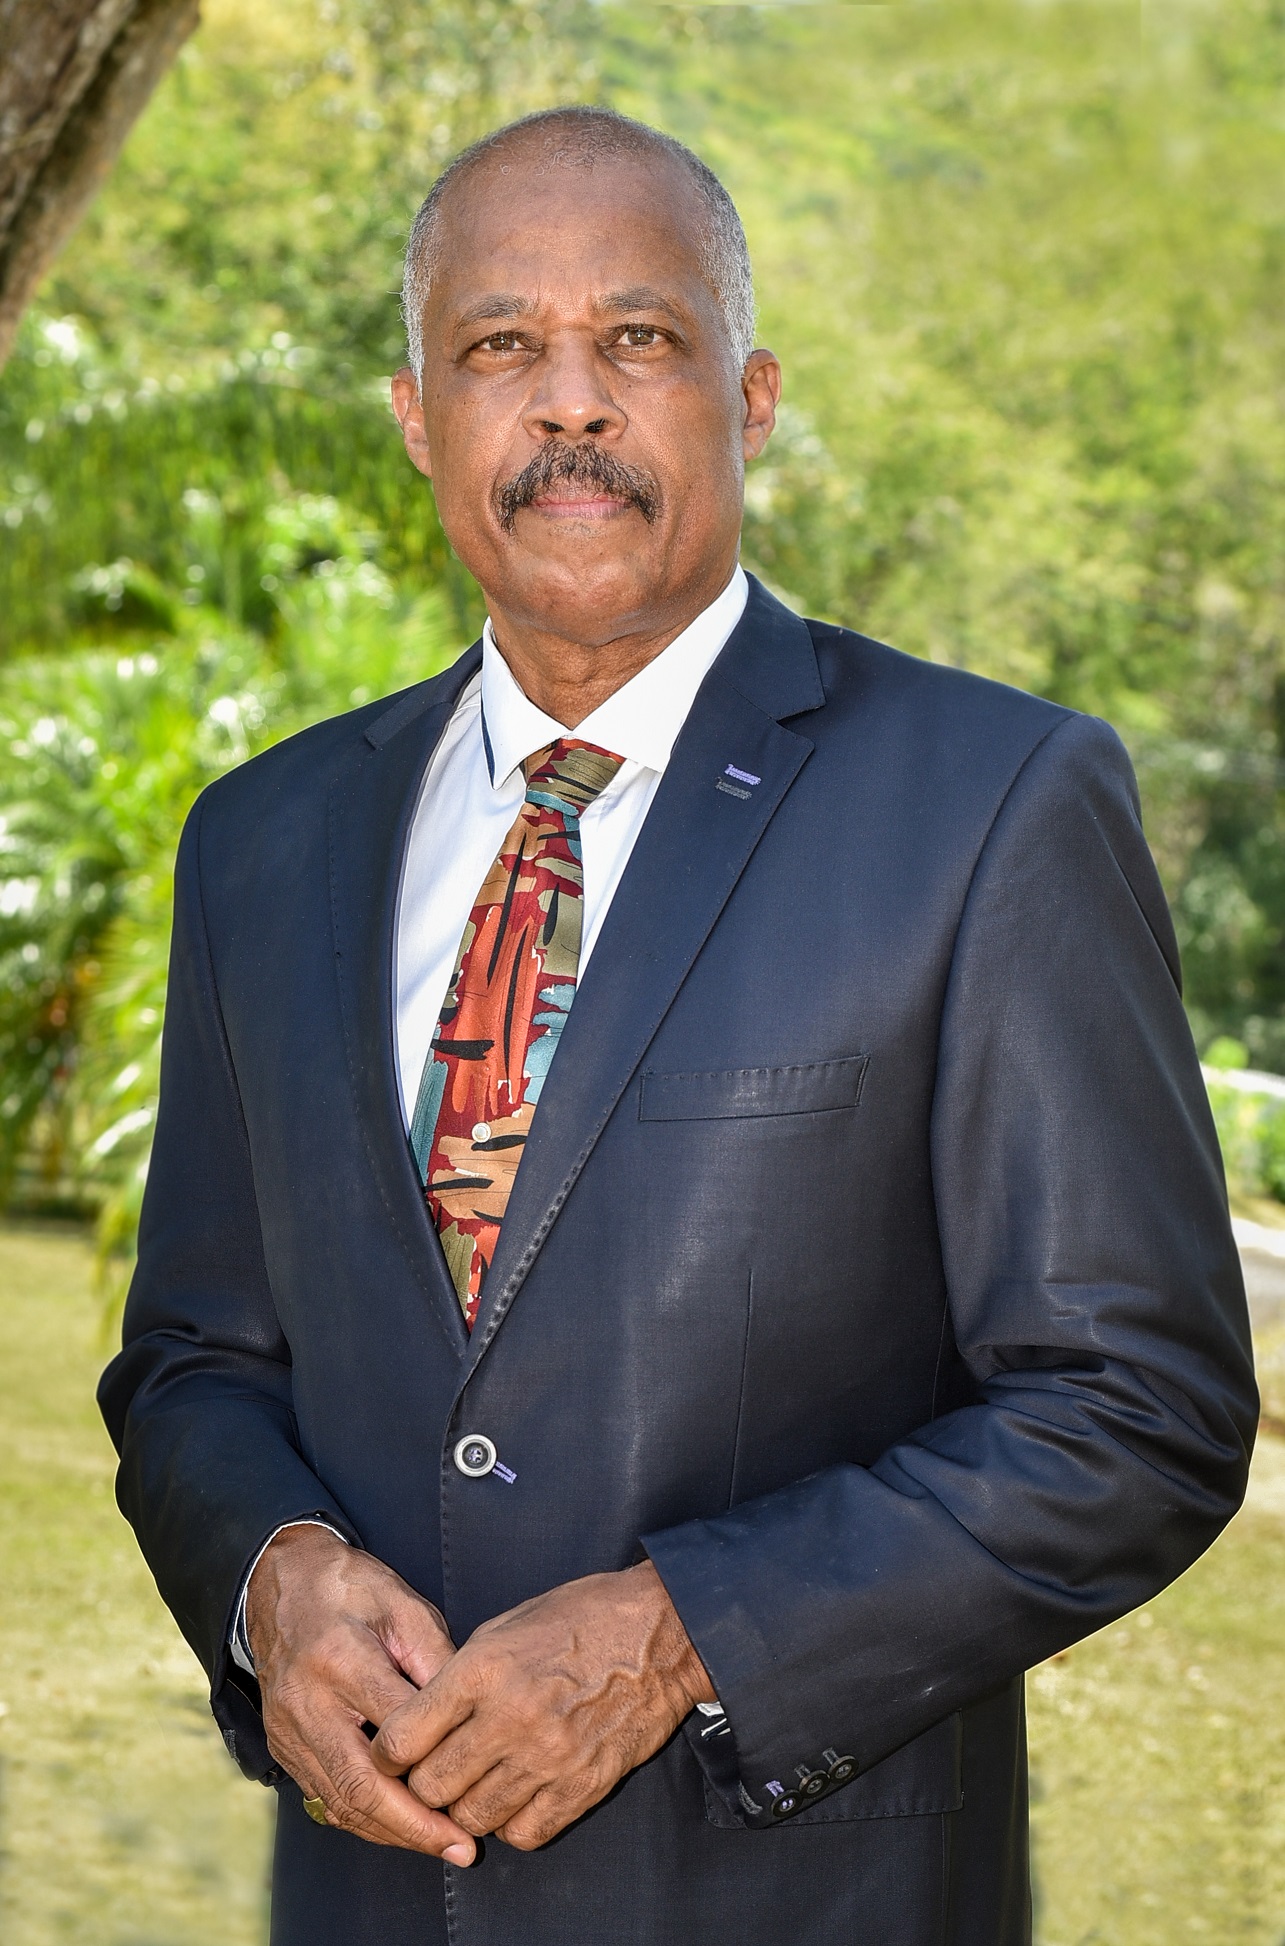 Professor Sir Hilary Beckles elected to new leadership role on ACU Council